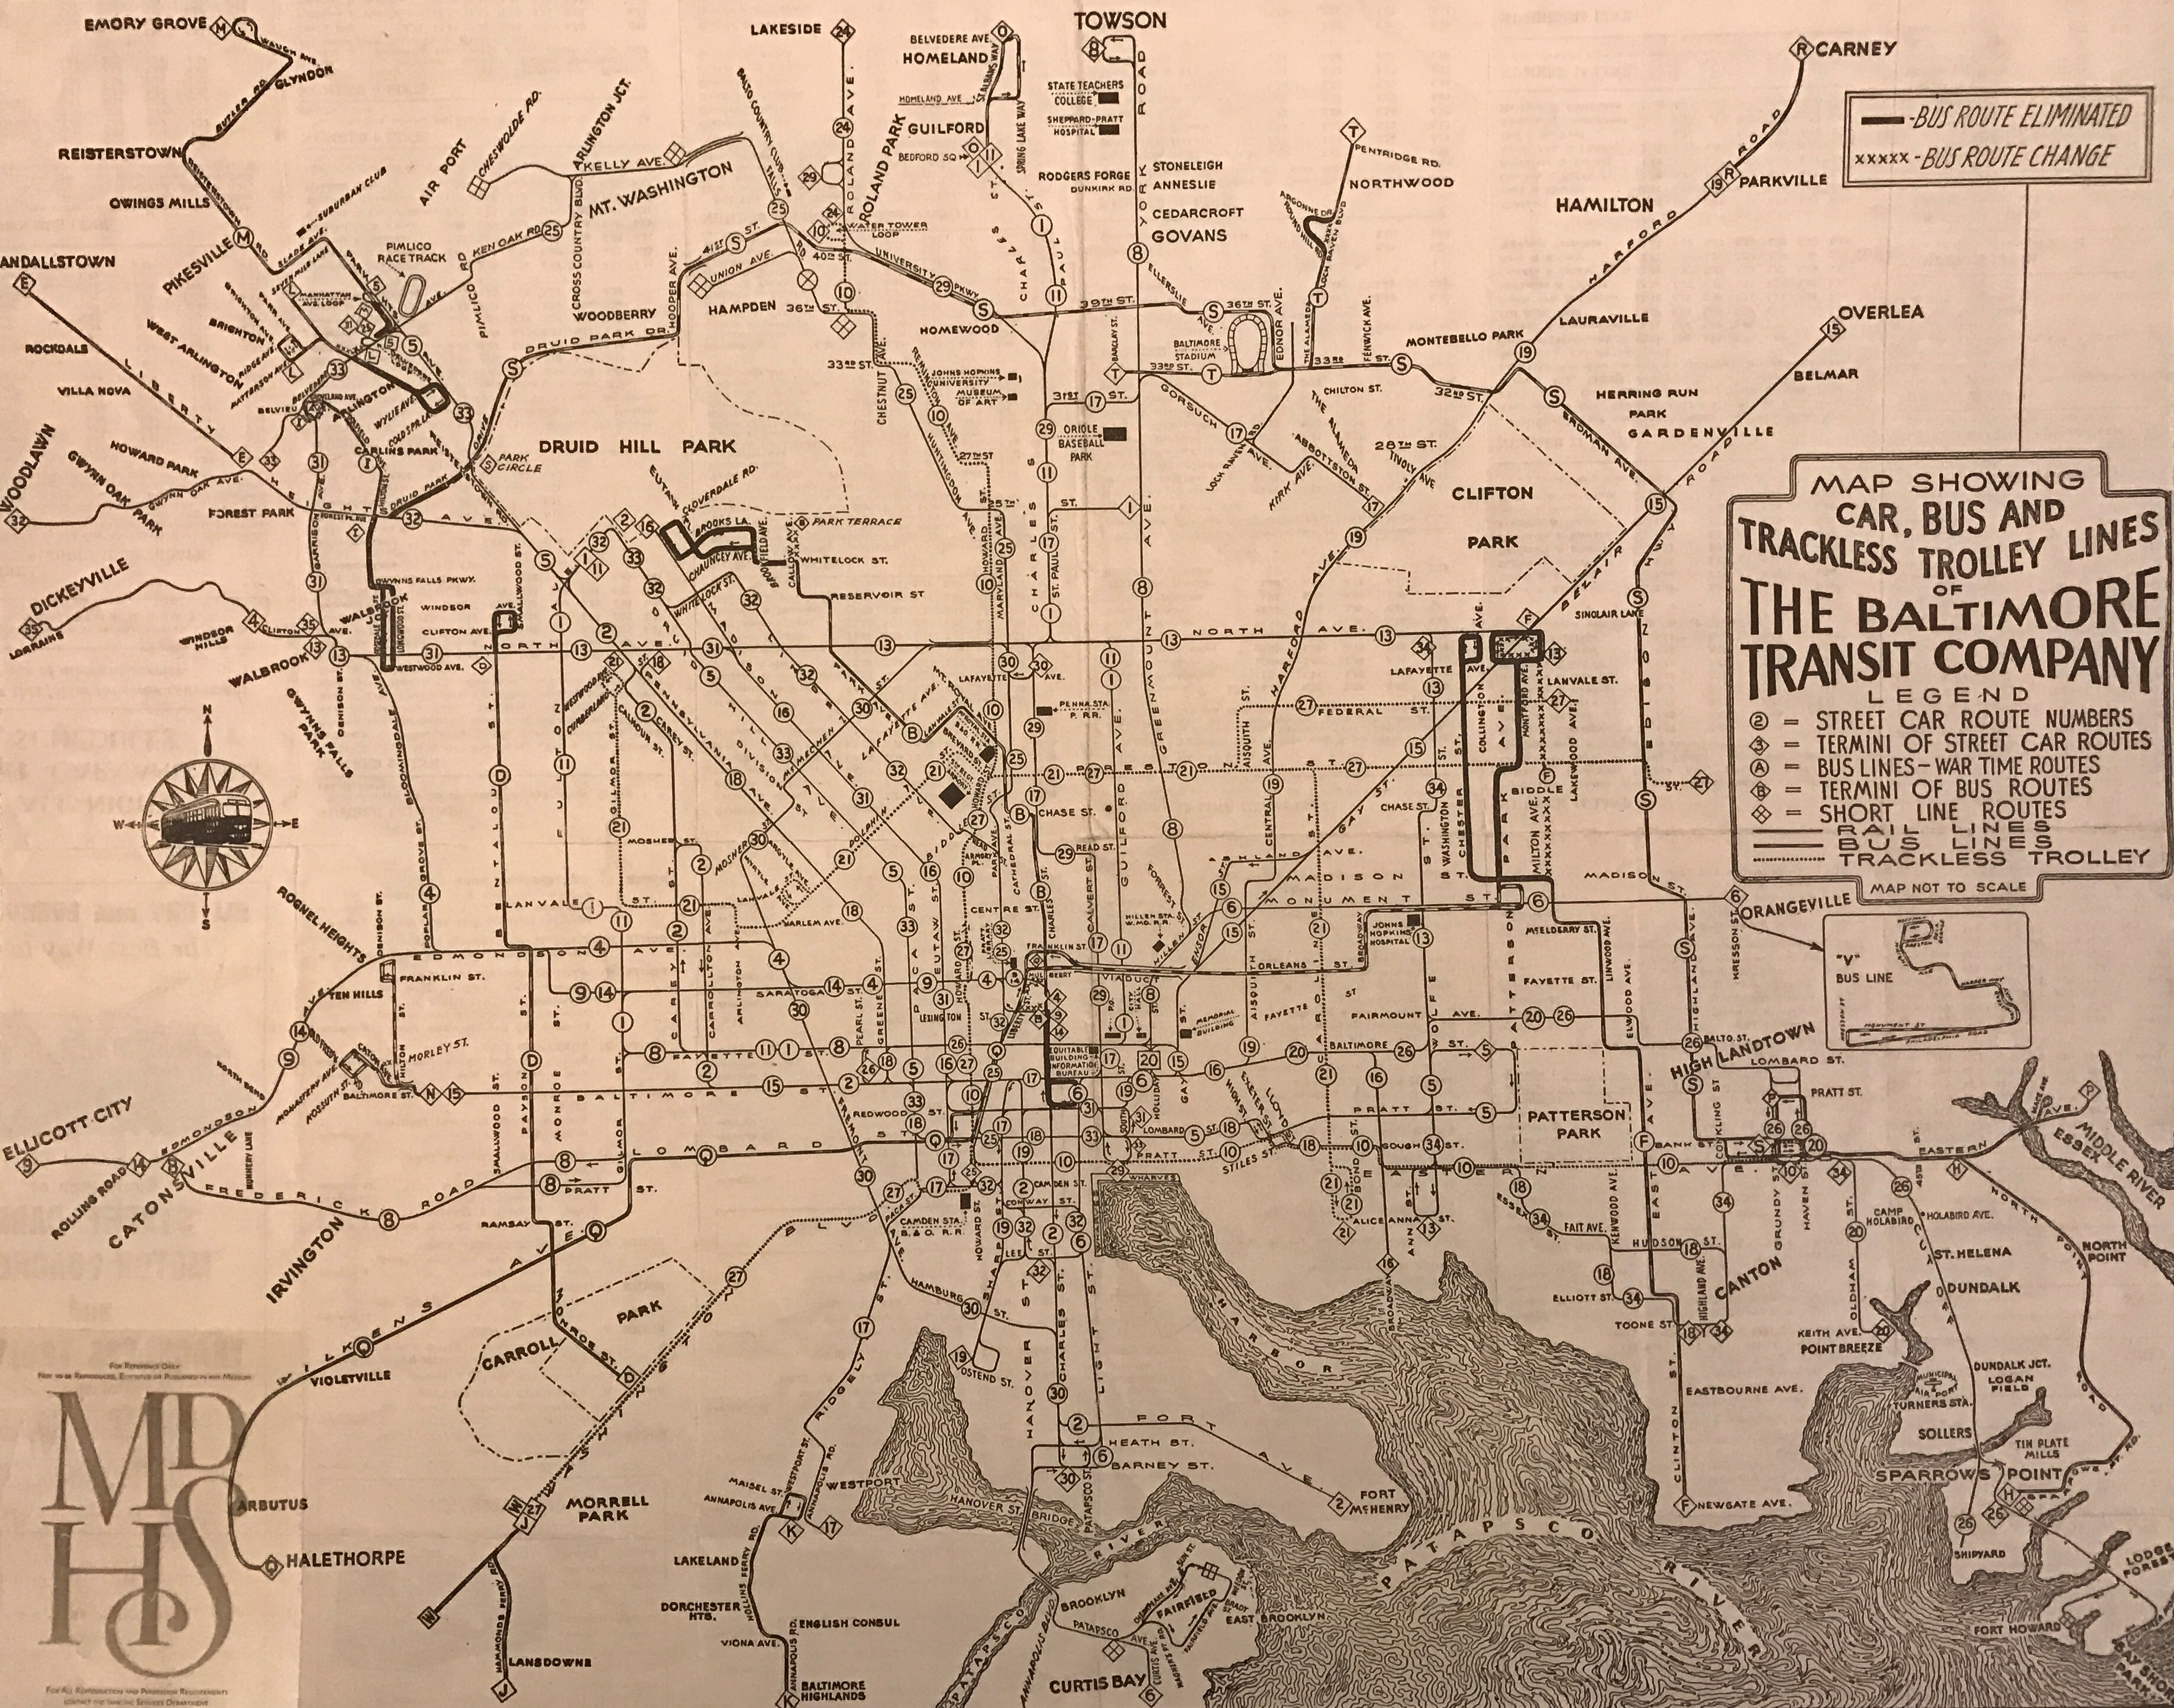 Map Showing Car, Bus and Trackless Trolley Lines of the Baltimore Transit Company, 1945, Map Collection, MdHS (reference photo)